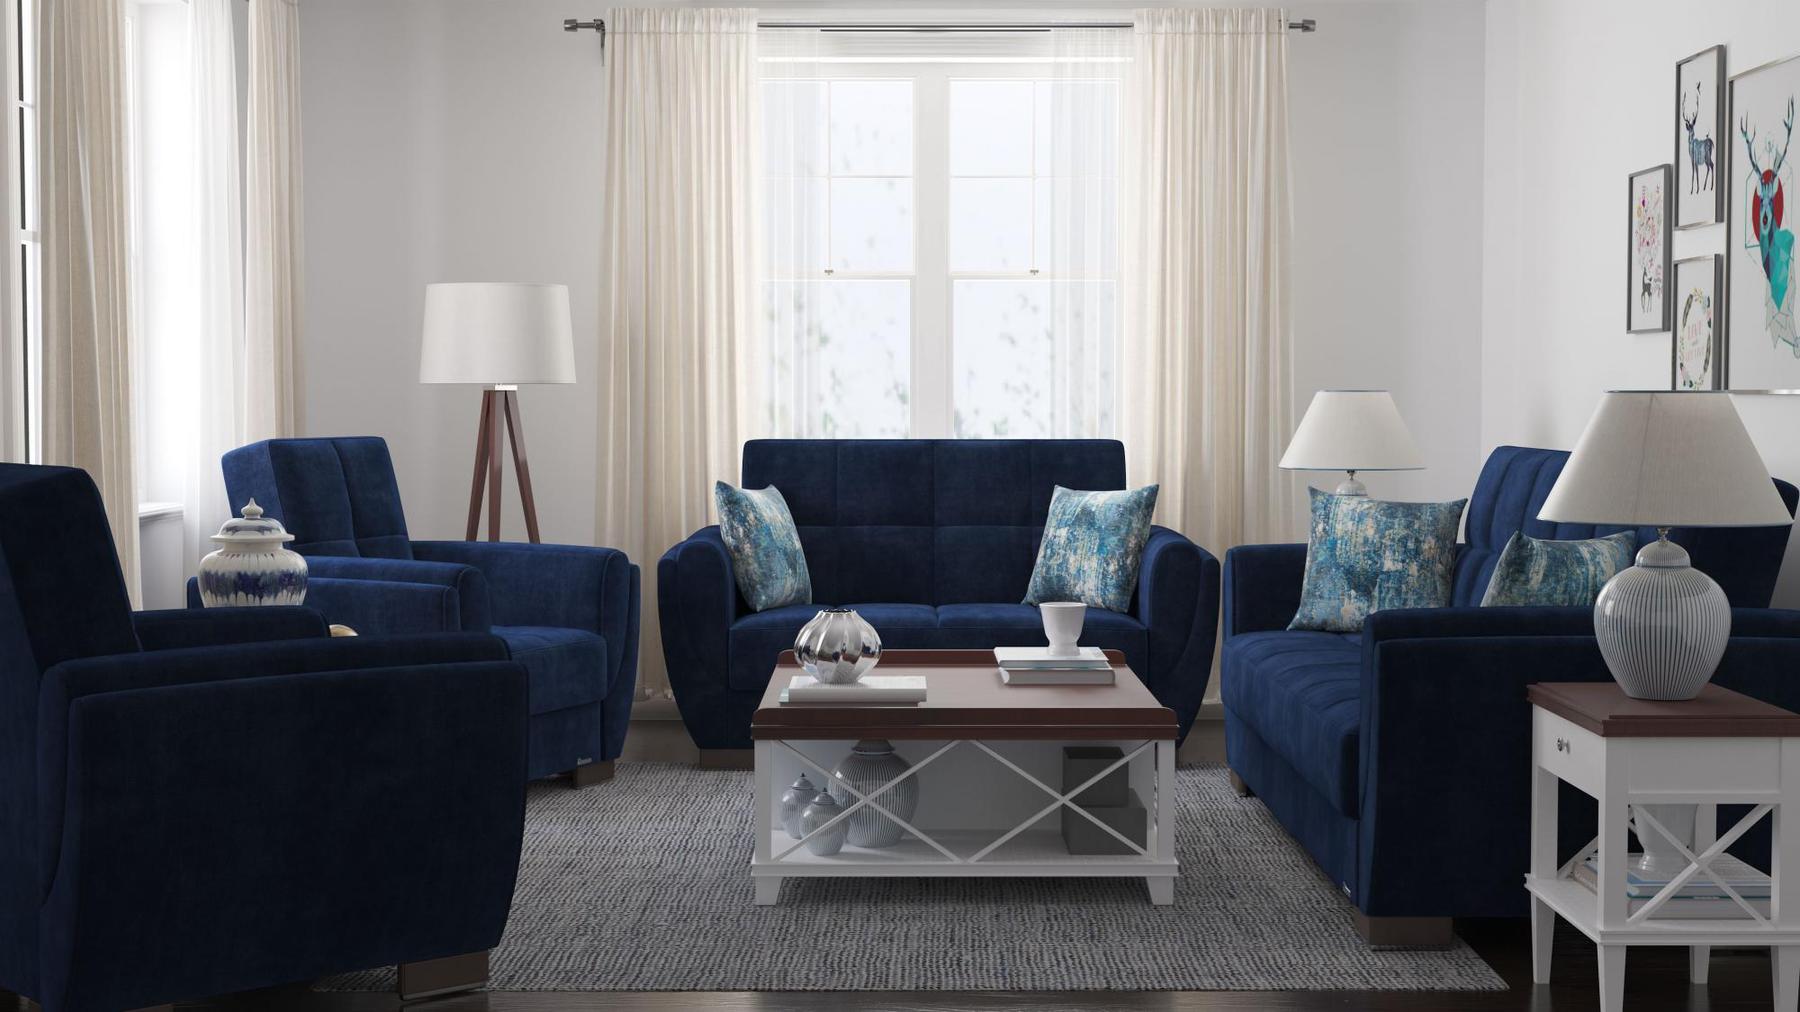 Modern design, True Blue , Microfiber upholstered convertible Armchair with underseat storage from Voyage Shelter by Ottomanson in living room lifestyle setting with the matching furniture set. This Armchair measures 42 inches width by 36 inches depth by 41 inches height.